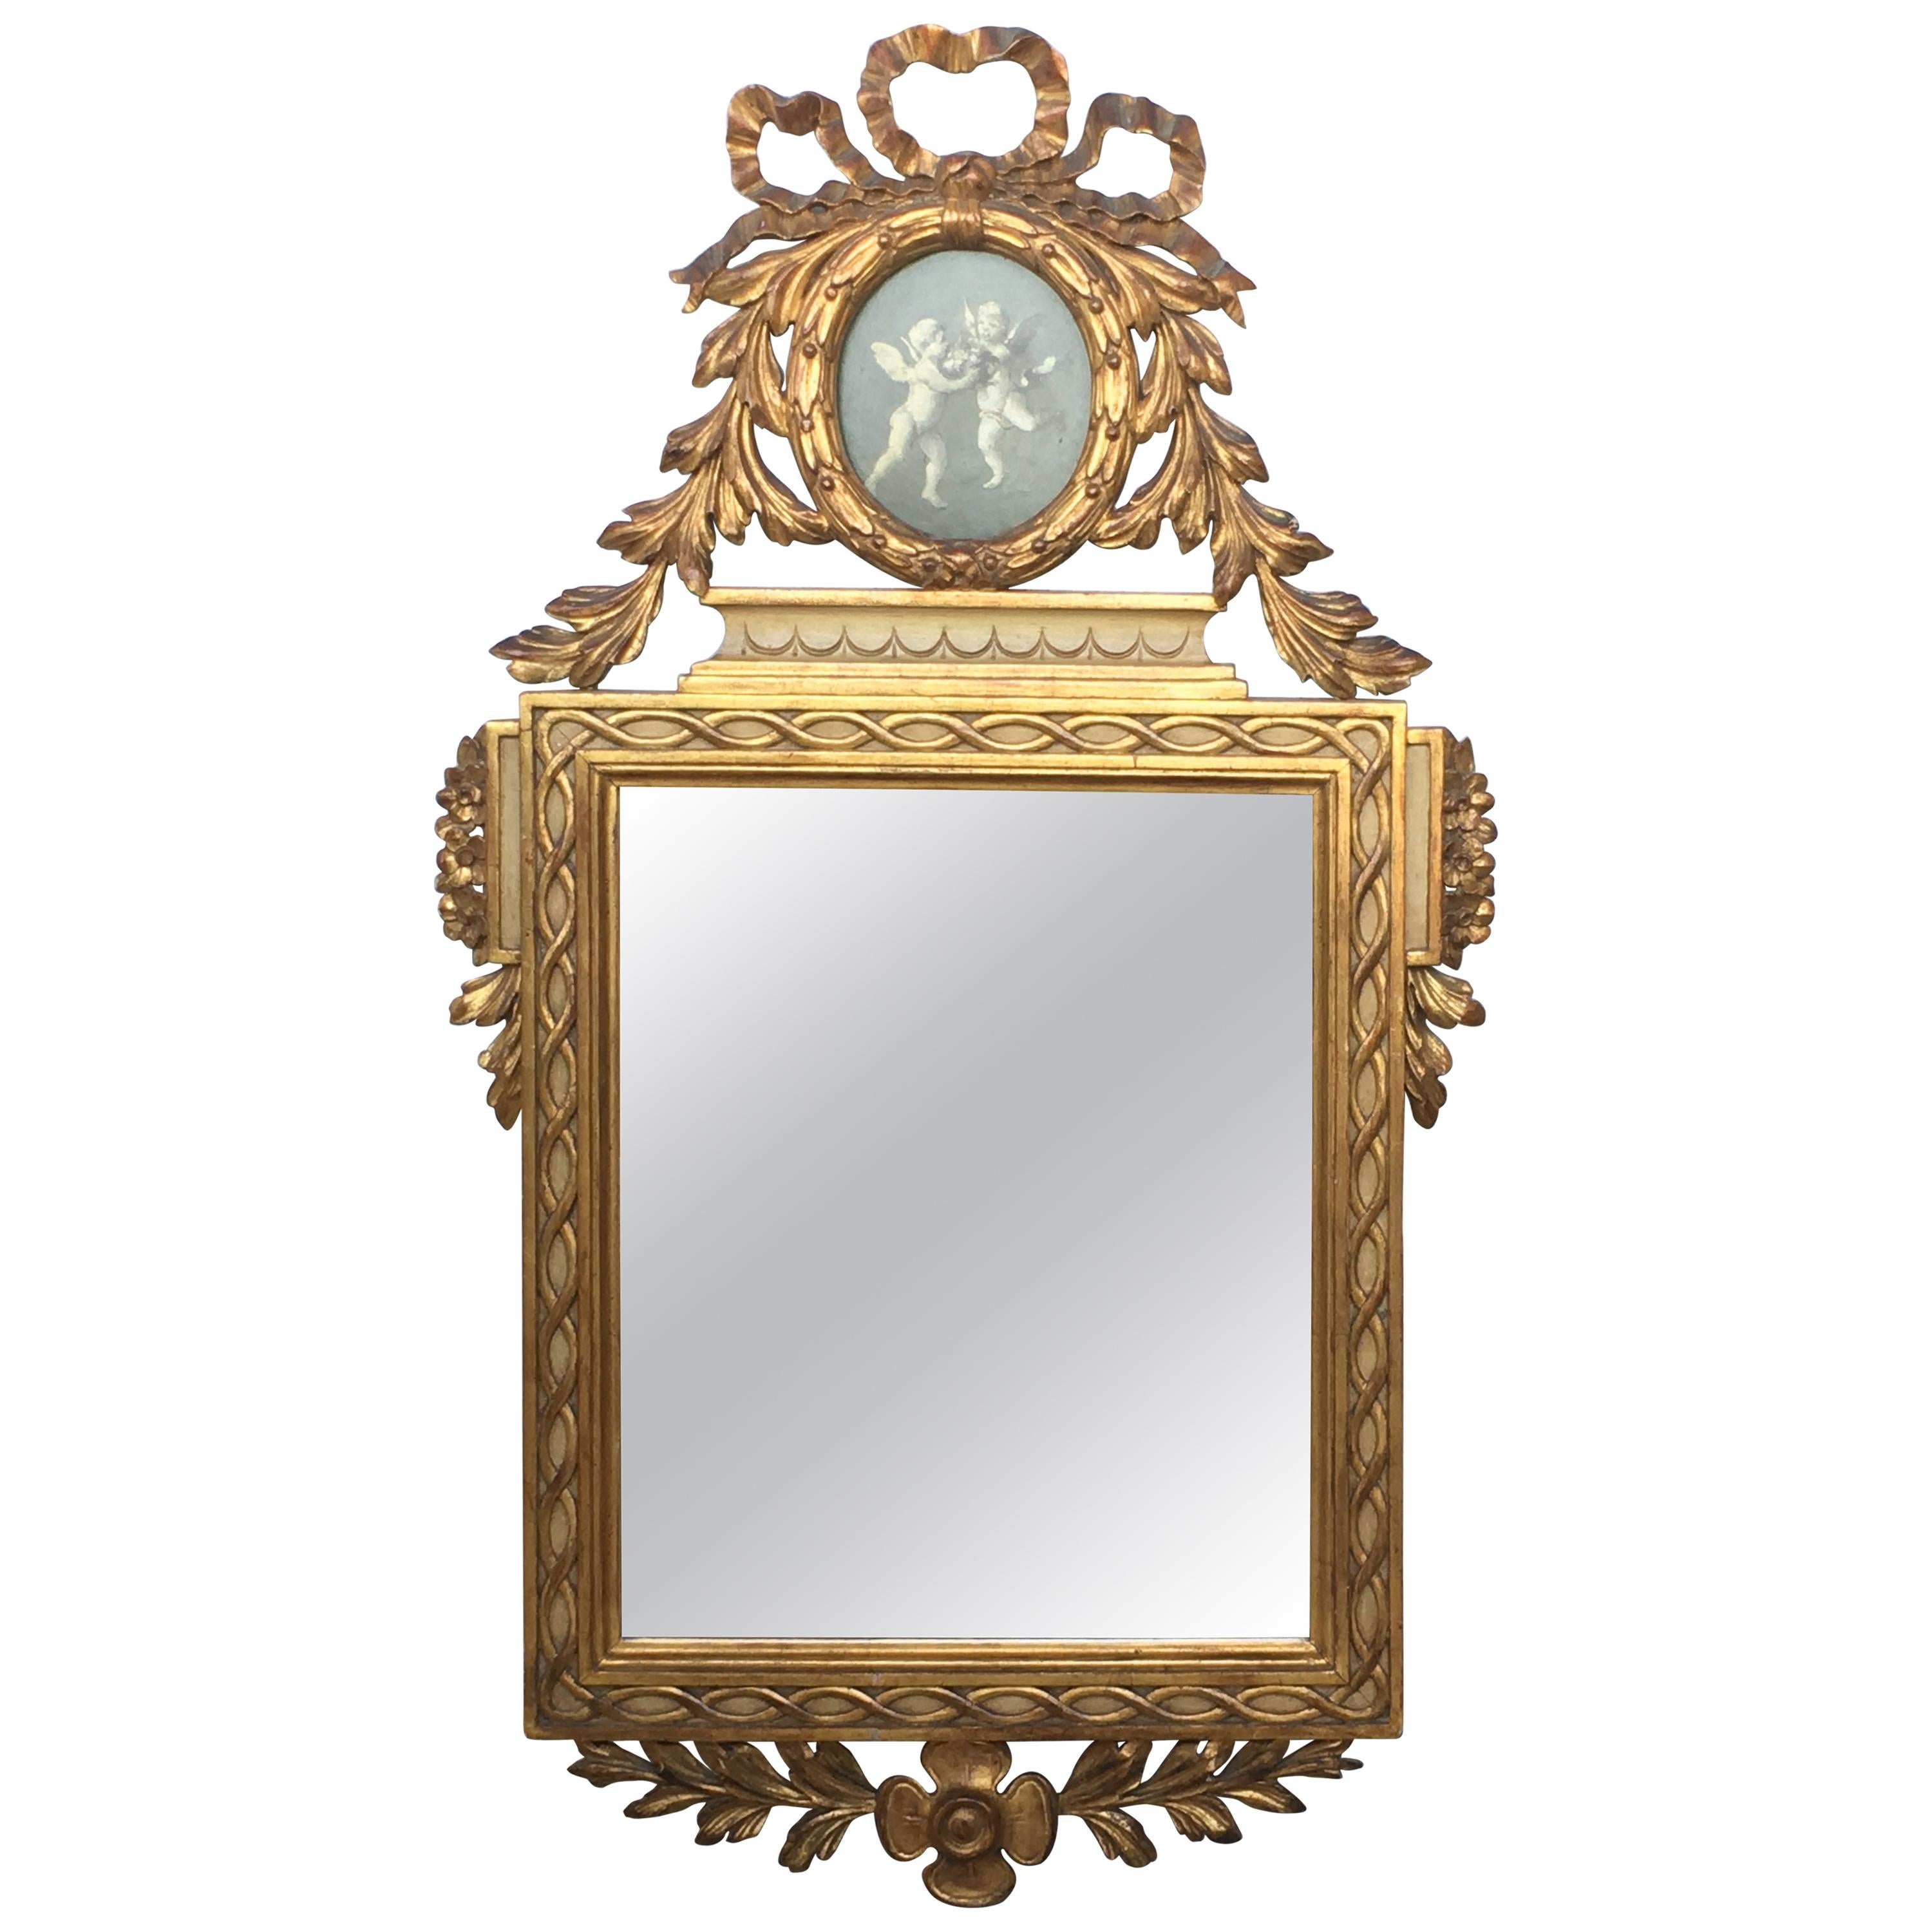 19th Century, French, Louis XVI Painted and Gilt Trumeau Mirror Depicting Cherub